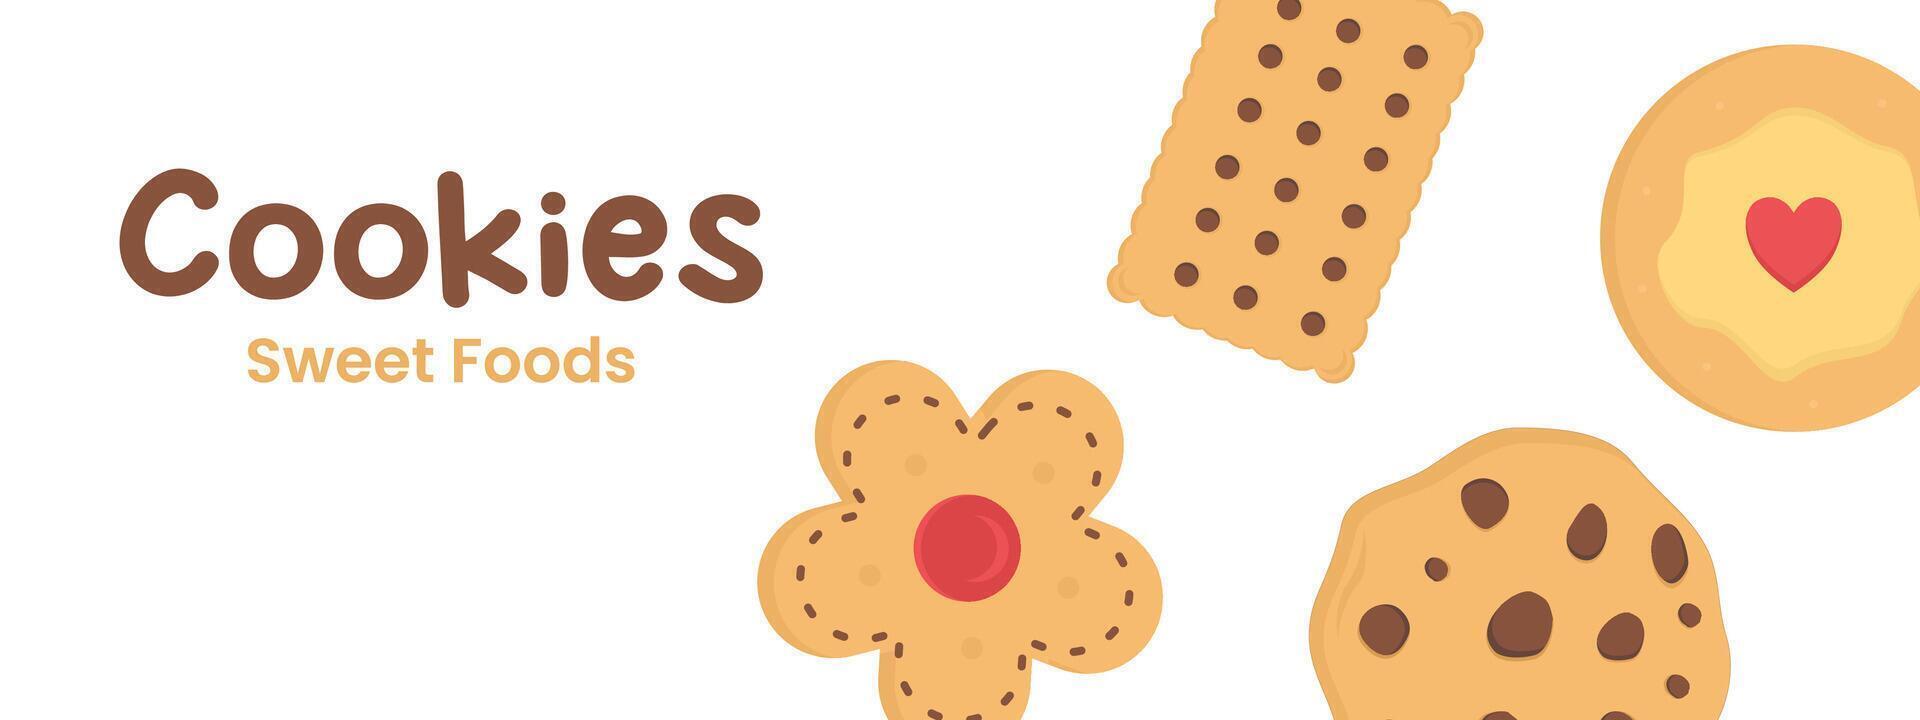 cartoon illustration of chocolate chip butter cookies with copy space for text in the form of a banner or background vector